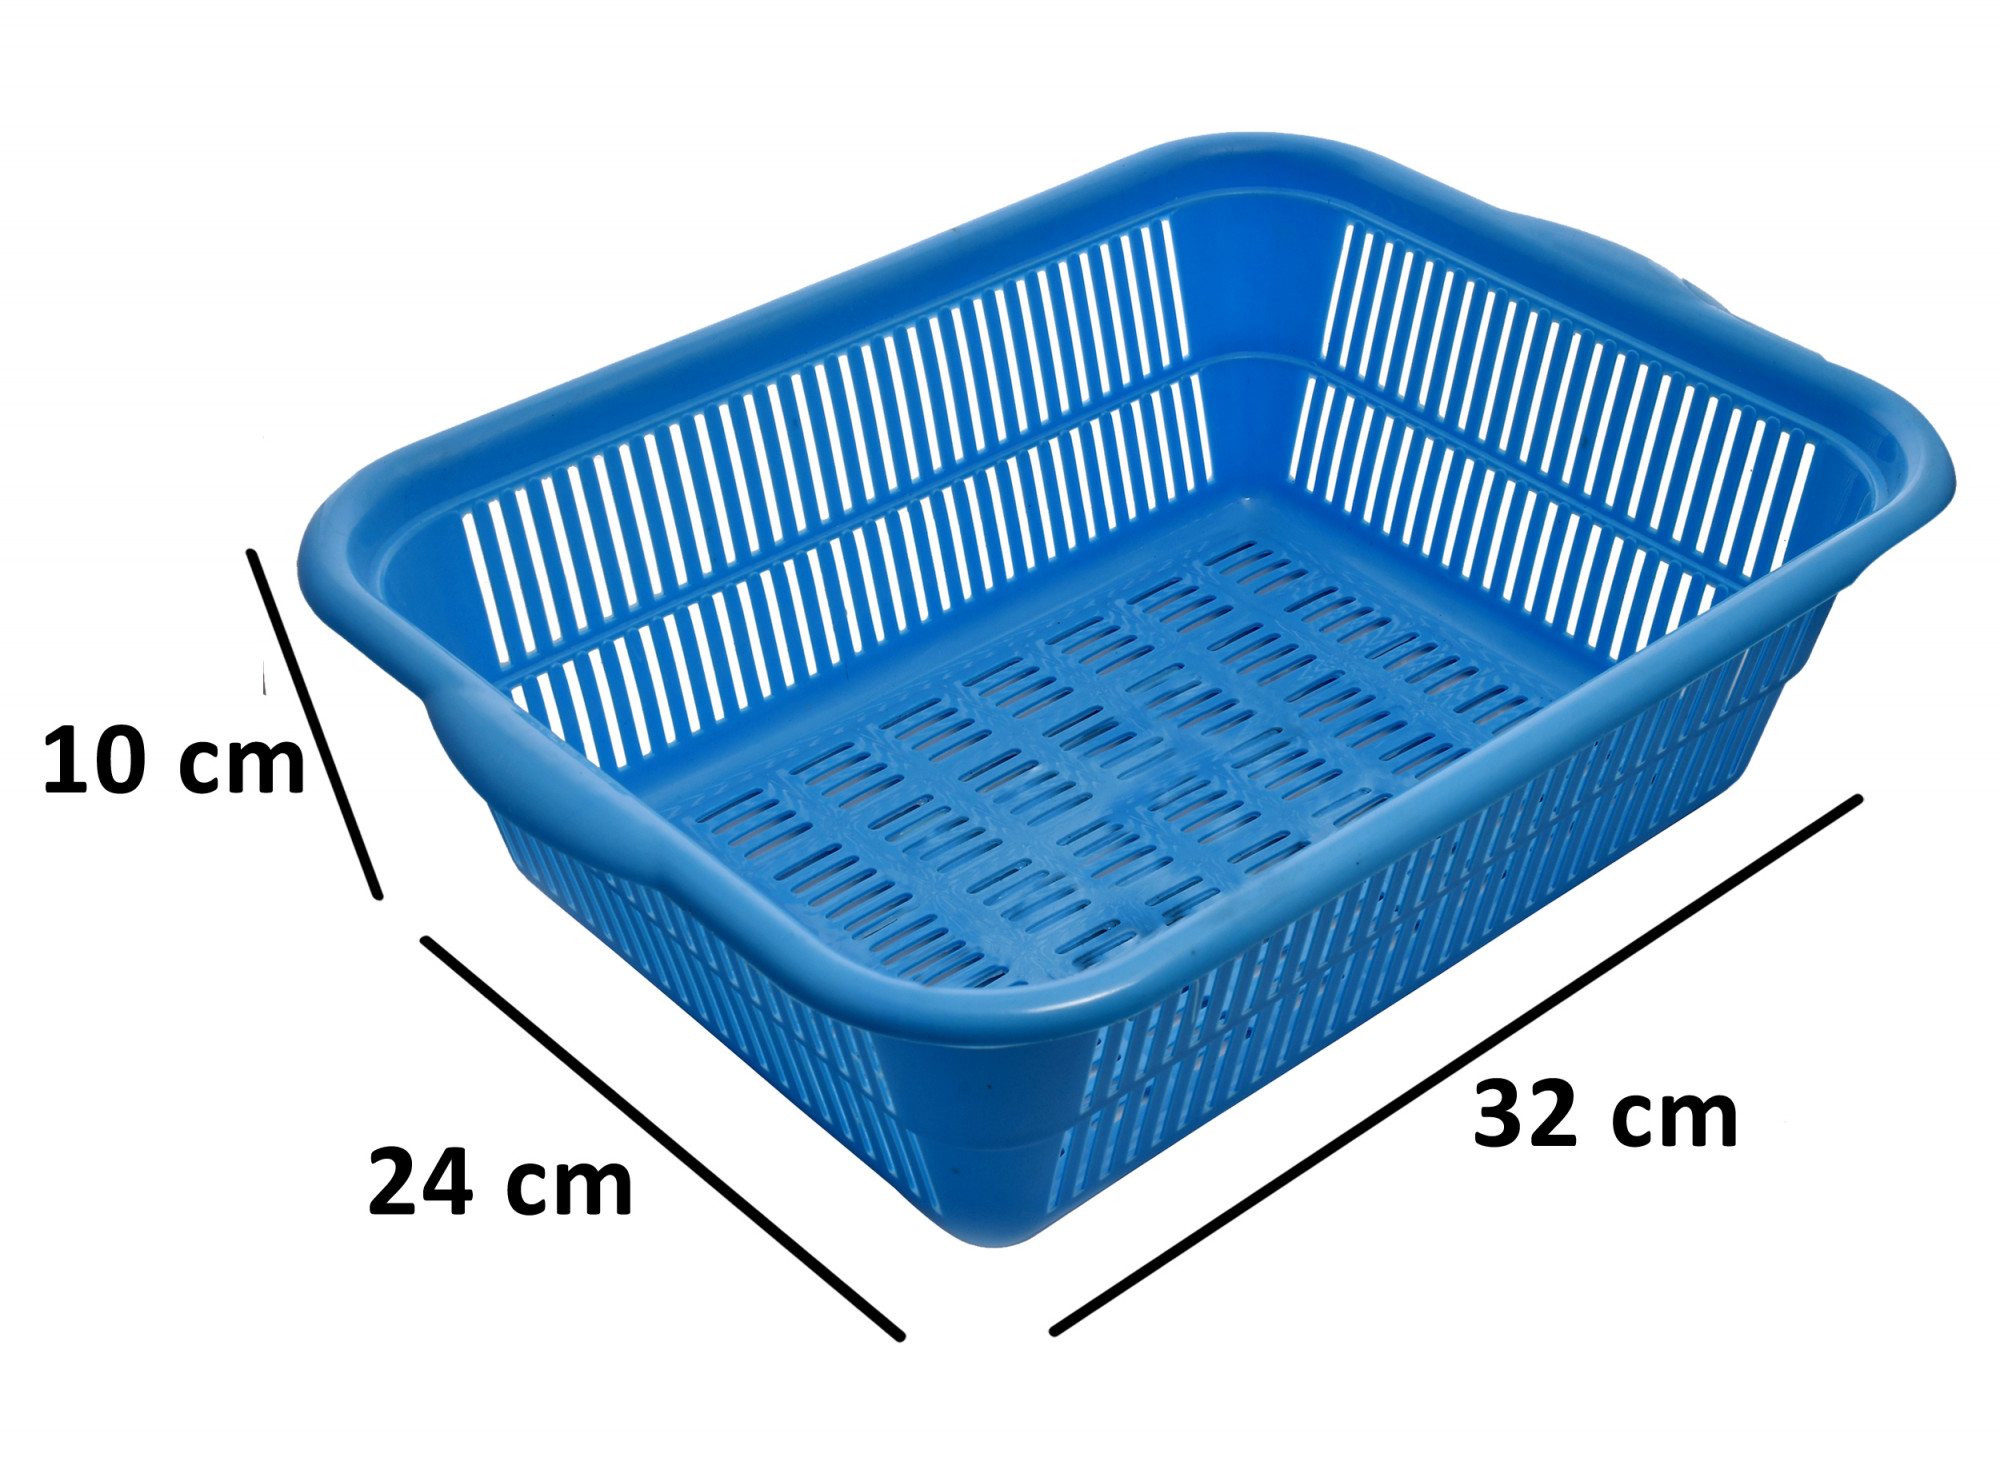 Kuber Industries Plastic 3 Pieces Kitchen Small Size Dish Rack Drainer Vegetables And Fruits Washing Basket Dish Rack Multipurpose Organizers (Blue & Red & Yellow)-KUBMART634